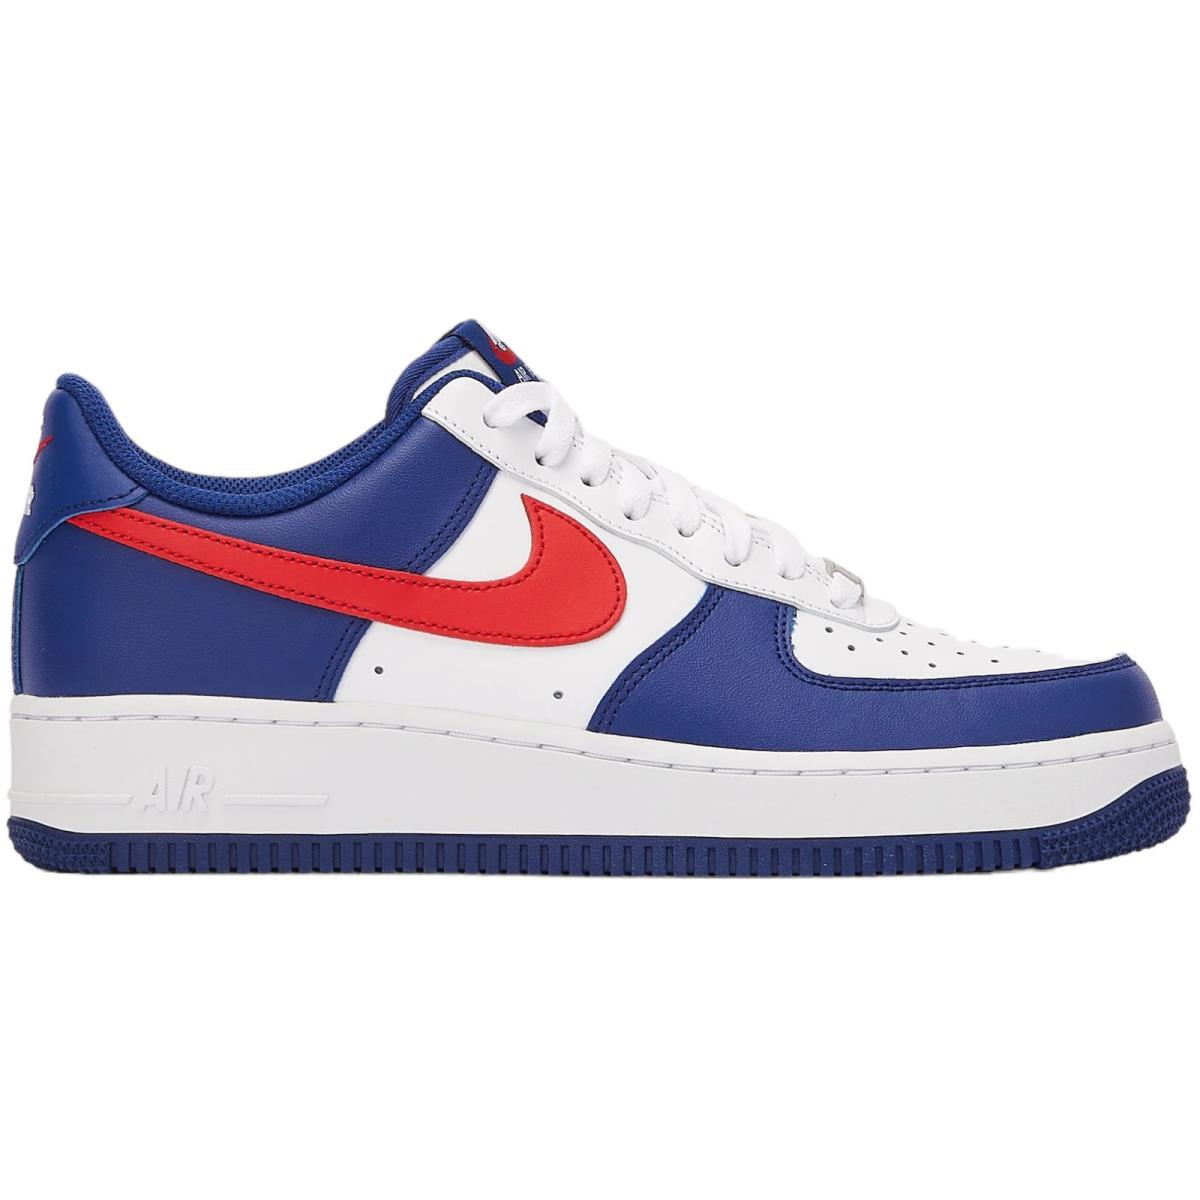 Nike Air Force 1 `07 Men`s Casual Shoes All Colors US Sizes 7-14 White/University Red/Deep Royal